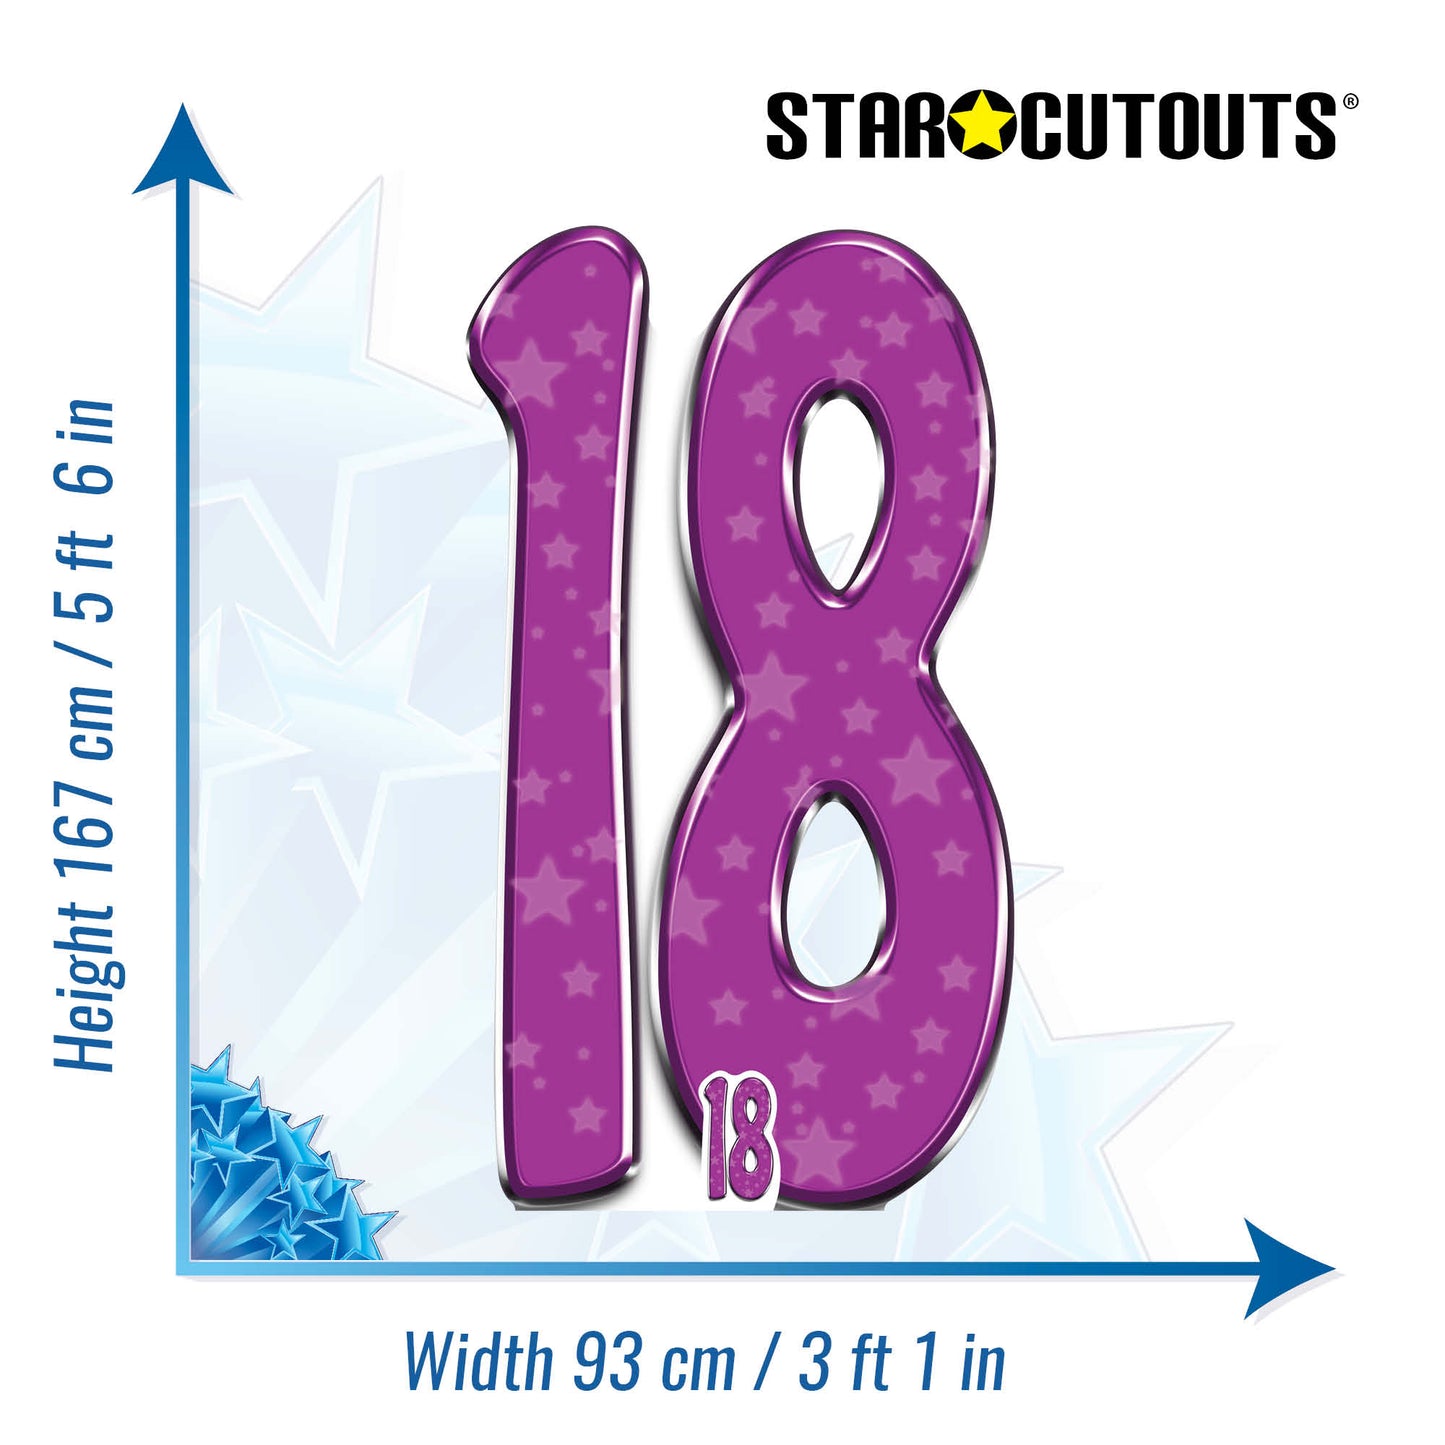 SC151 Number 18 Cardboard Cut Out Height 167cm